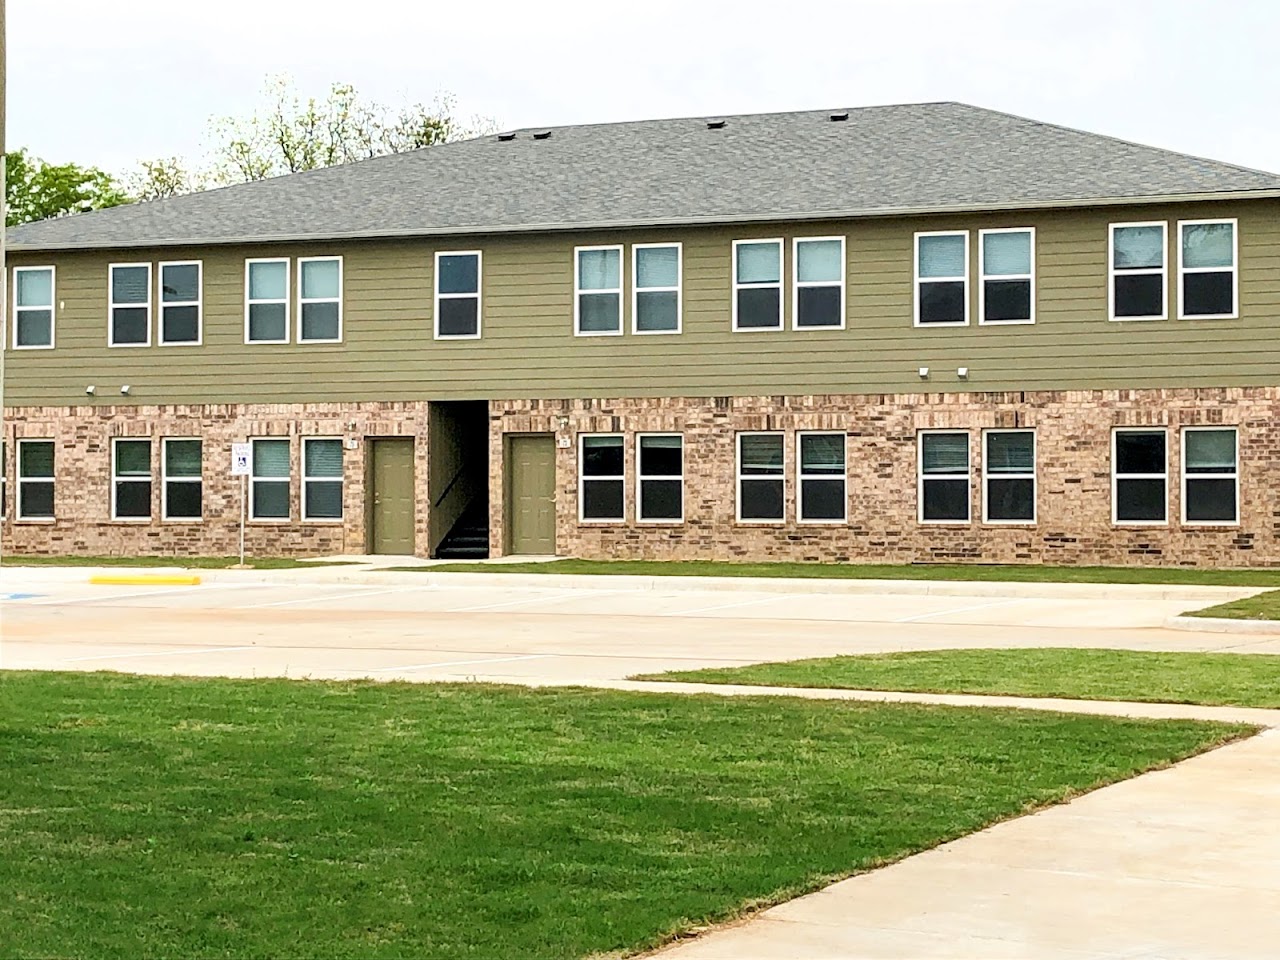 Photo of DIXON PARK APARTMENTS. Affordable housing located at 1224 N 1ST AVE DURANT, OK 74701